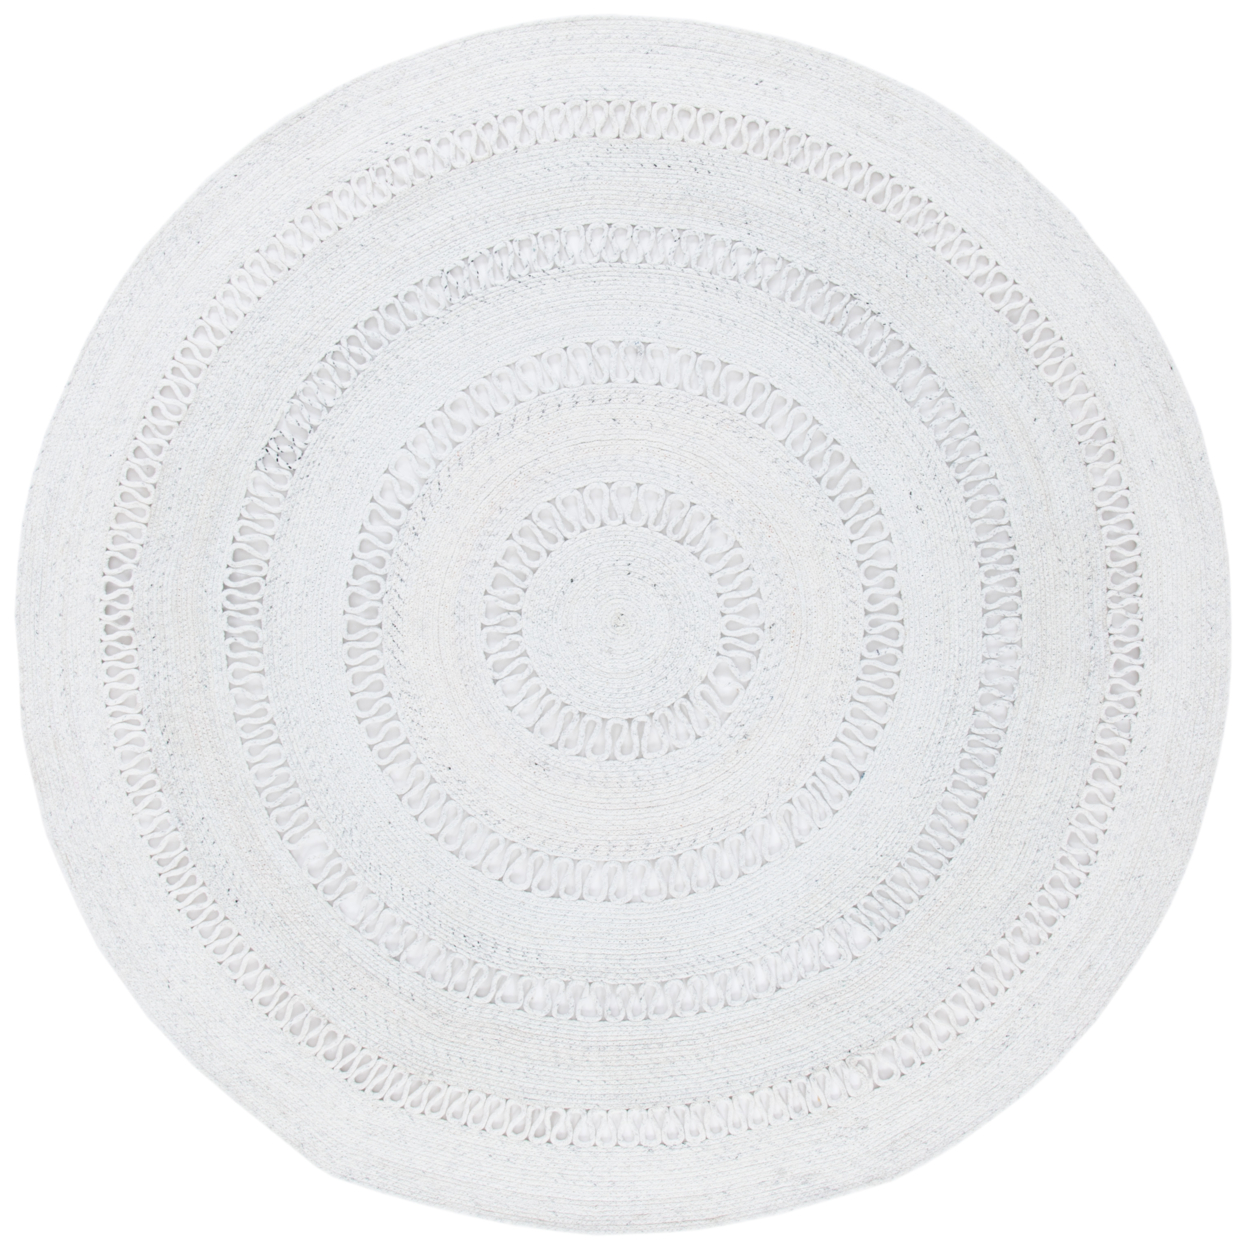 SAFAVIEH Cape Cod Collection CAP221A Handwoven Ivory Rug - 5' Round